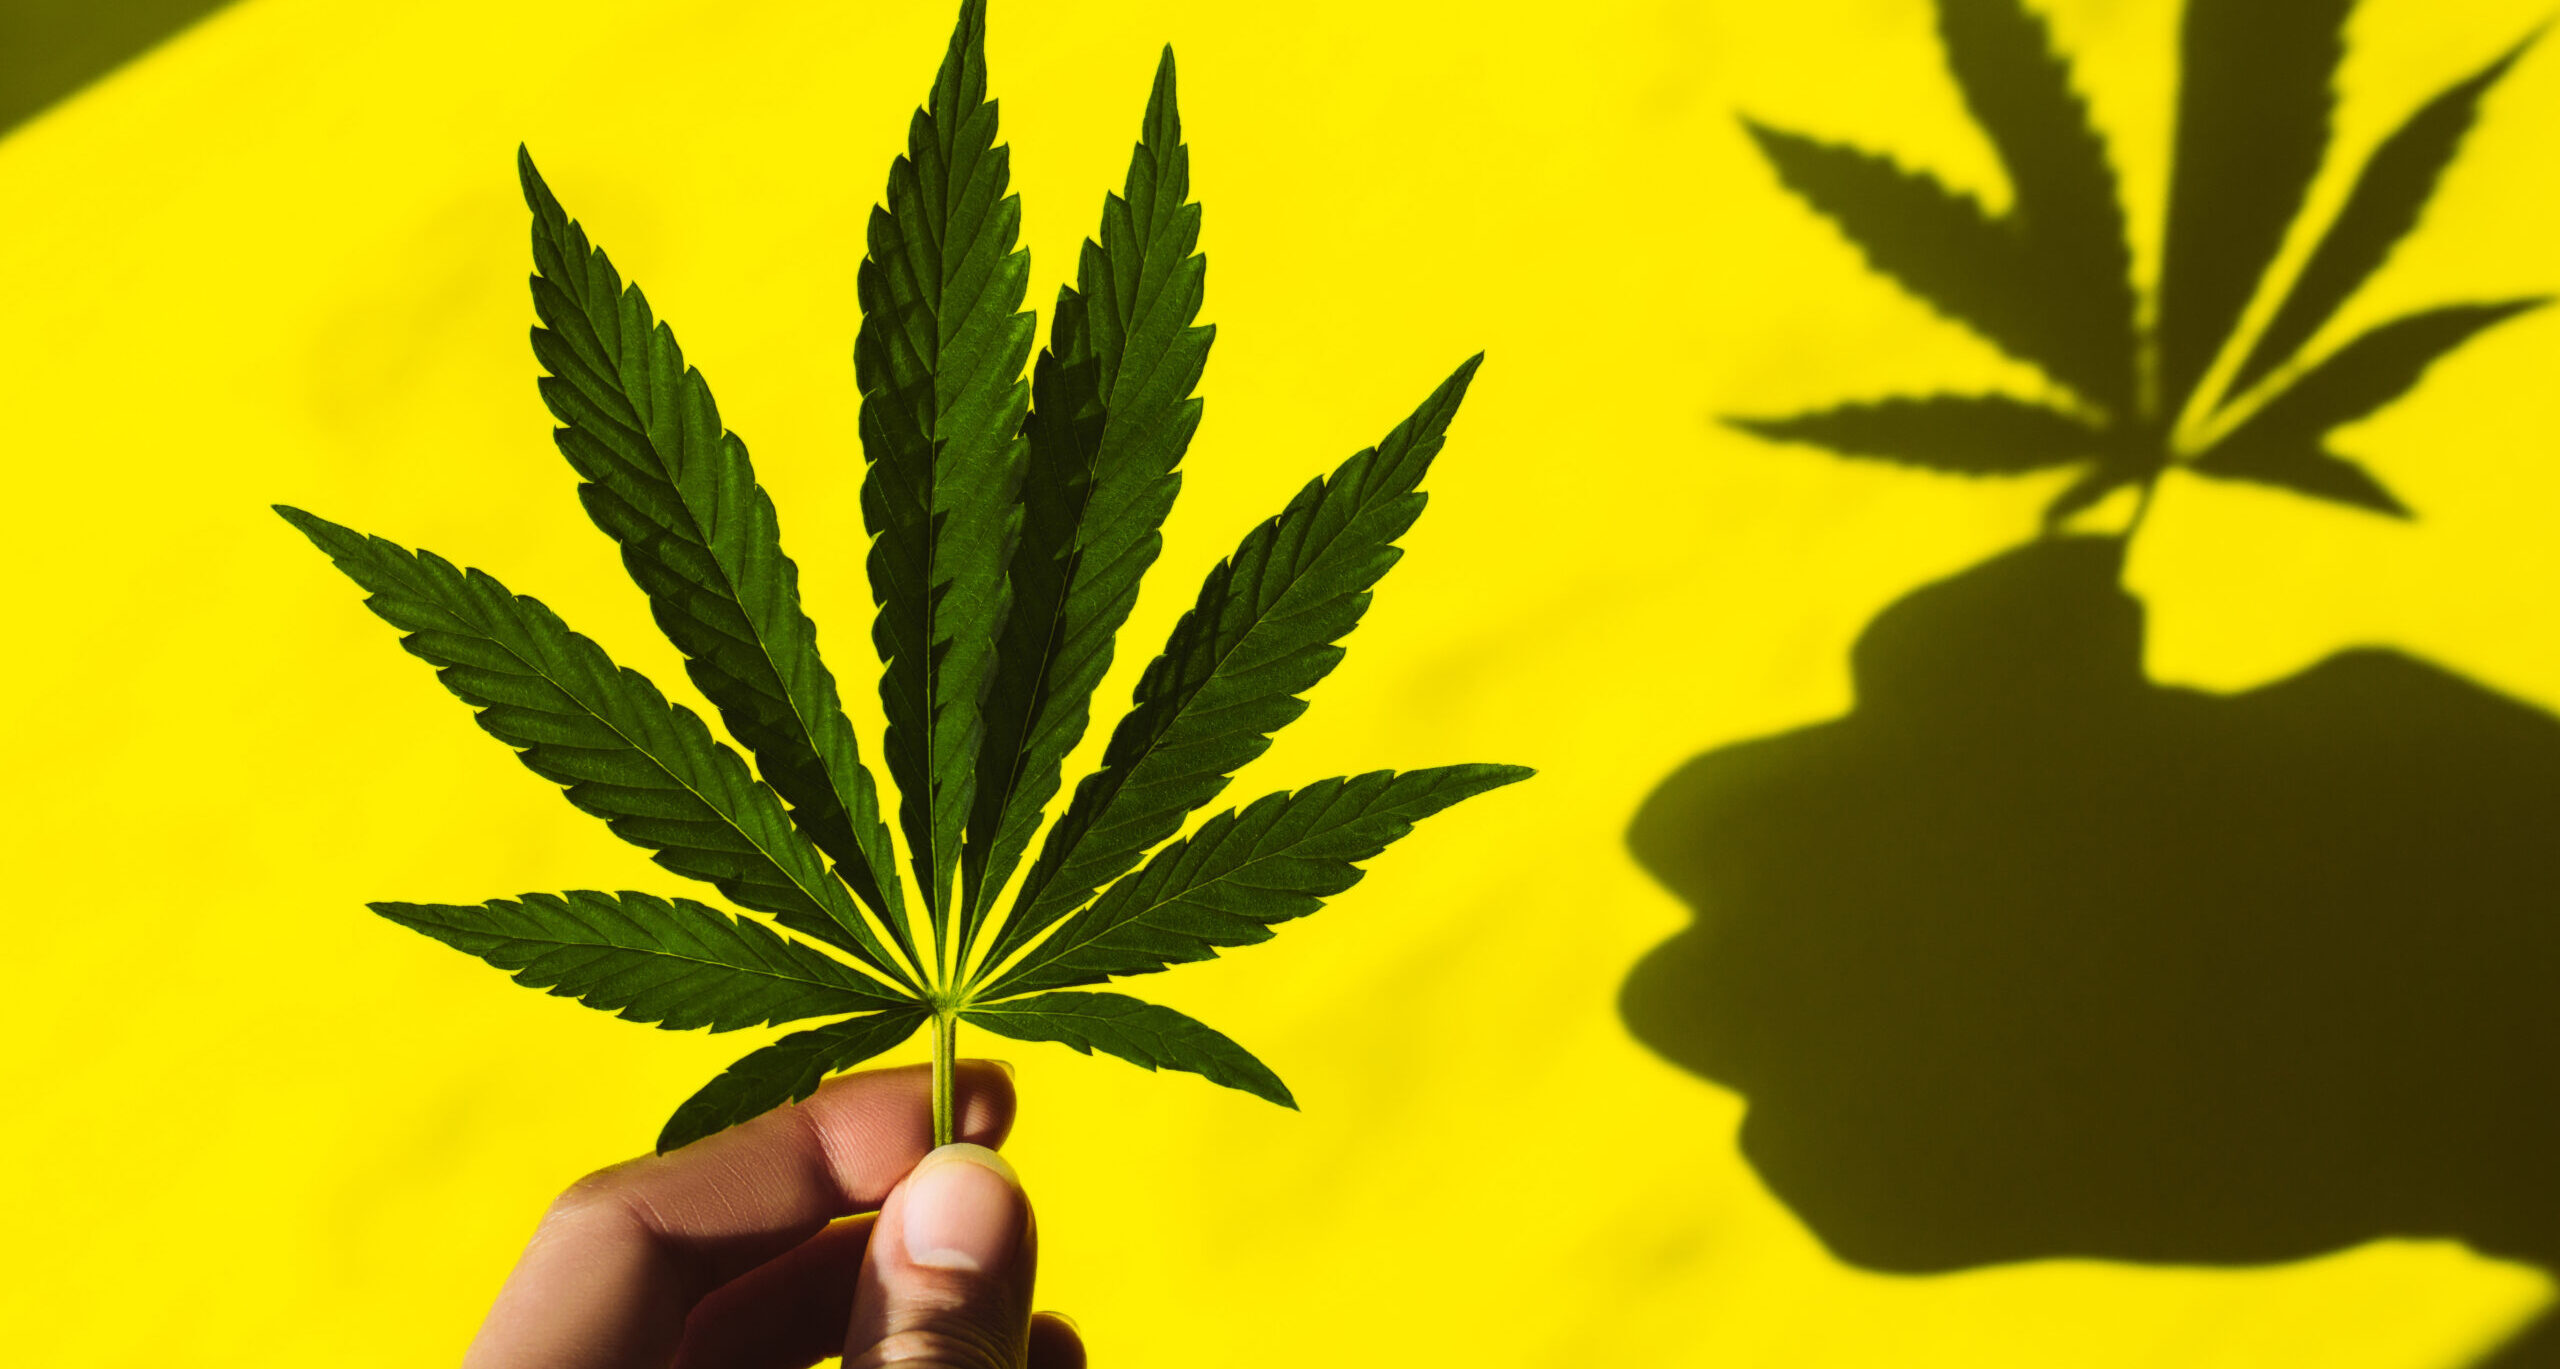 Have You Ever Wondered What ‘420’ Actually Means?